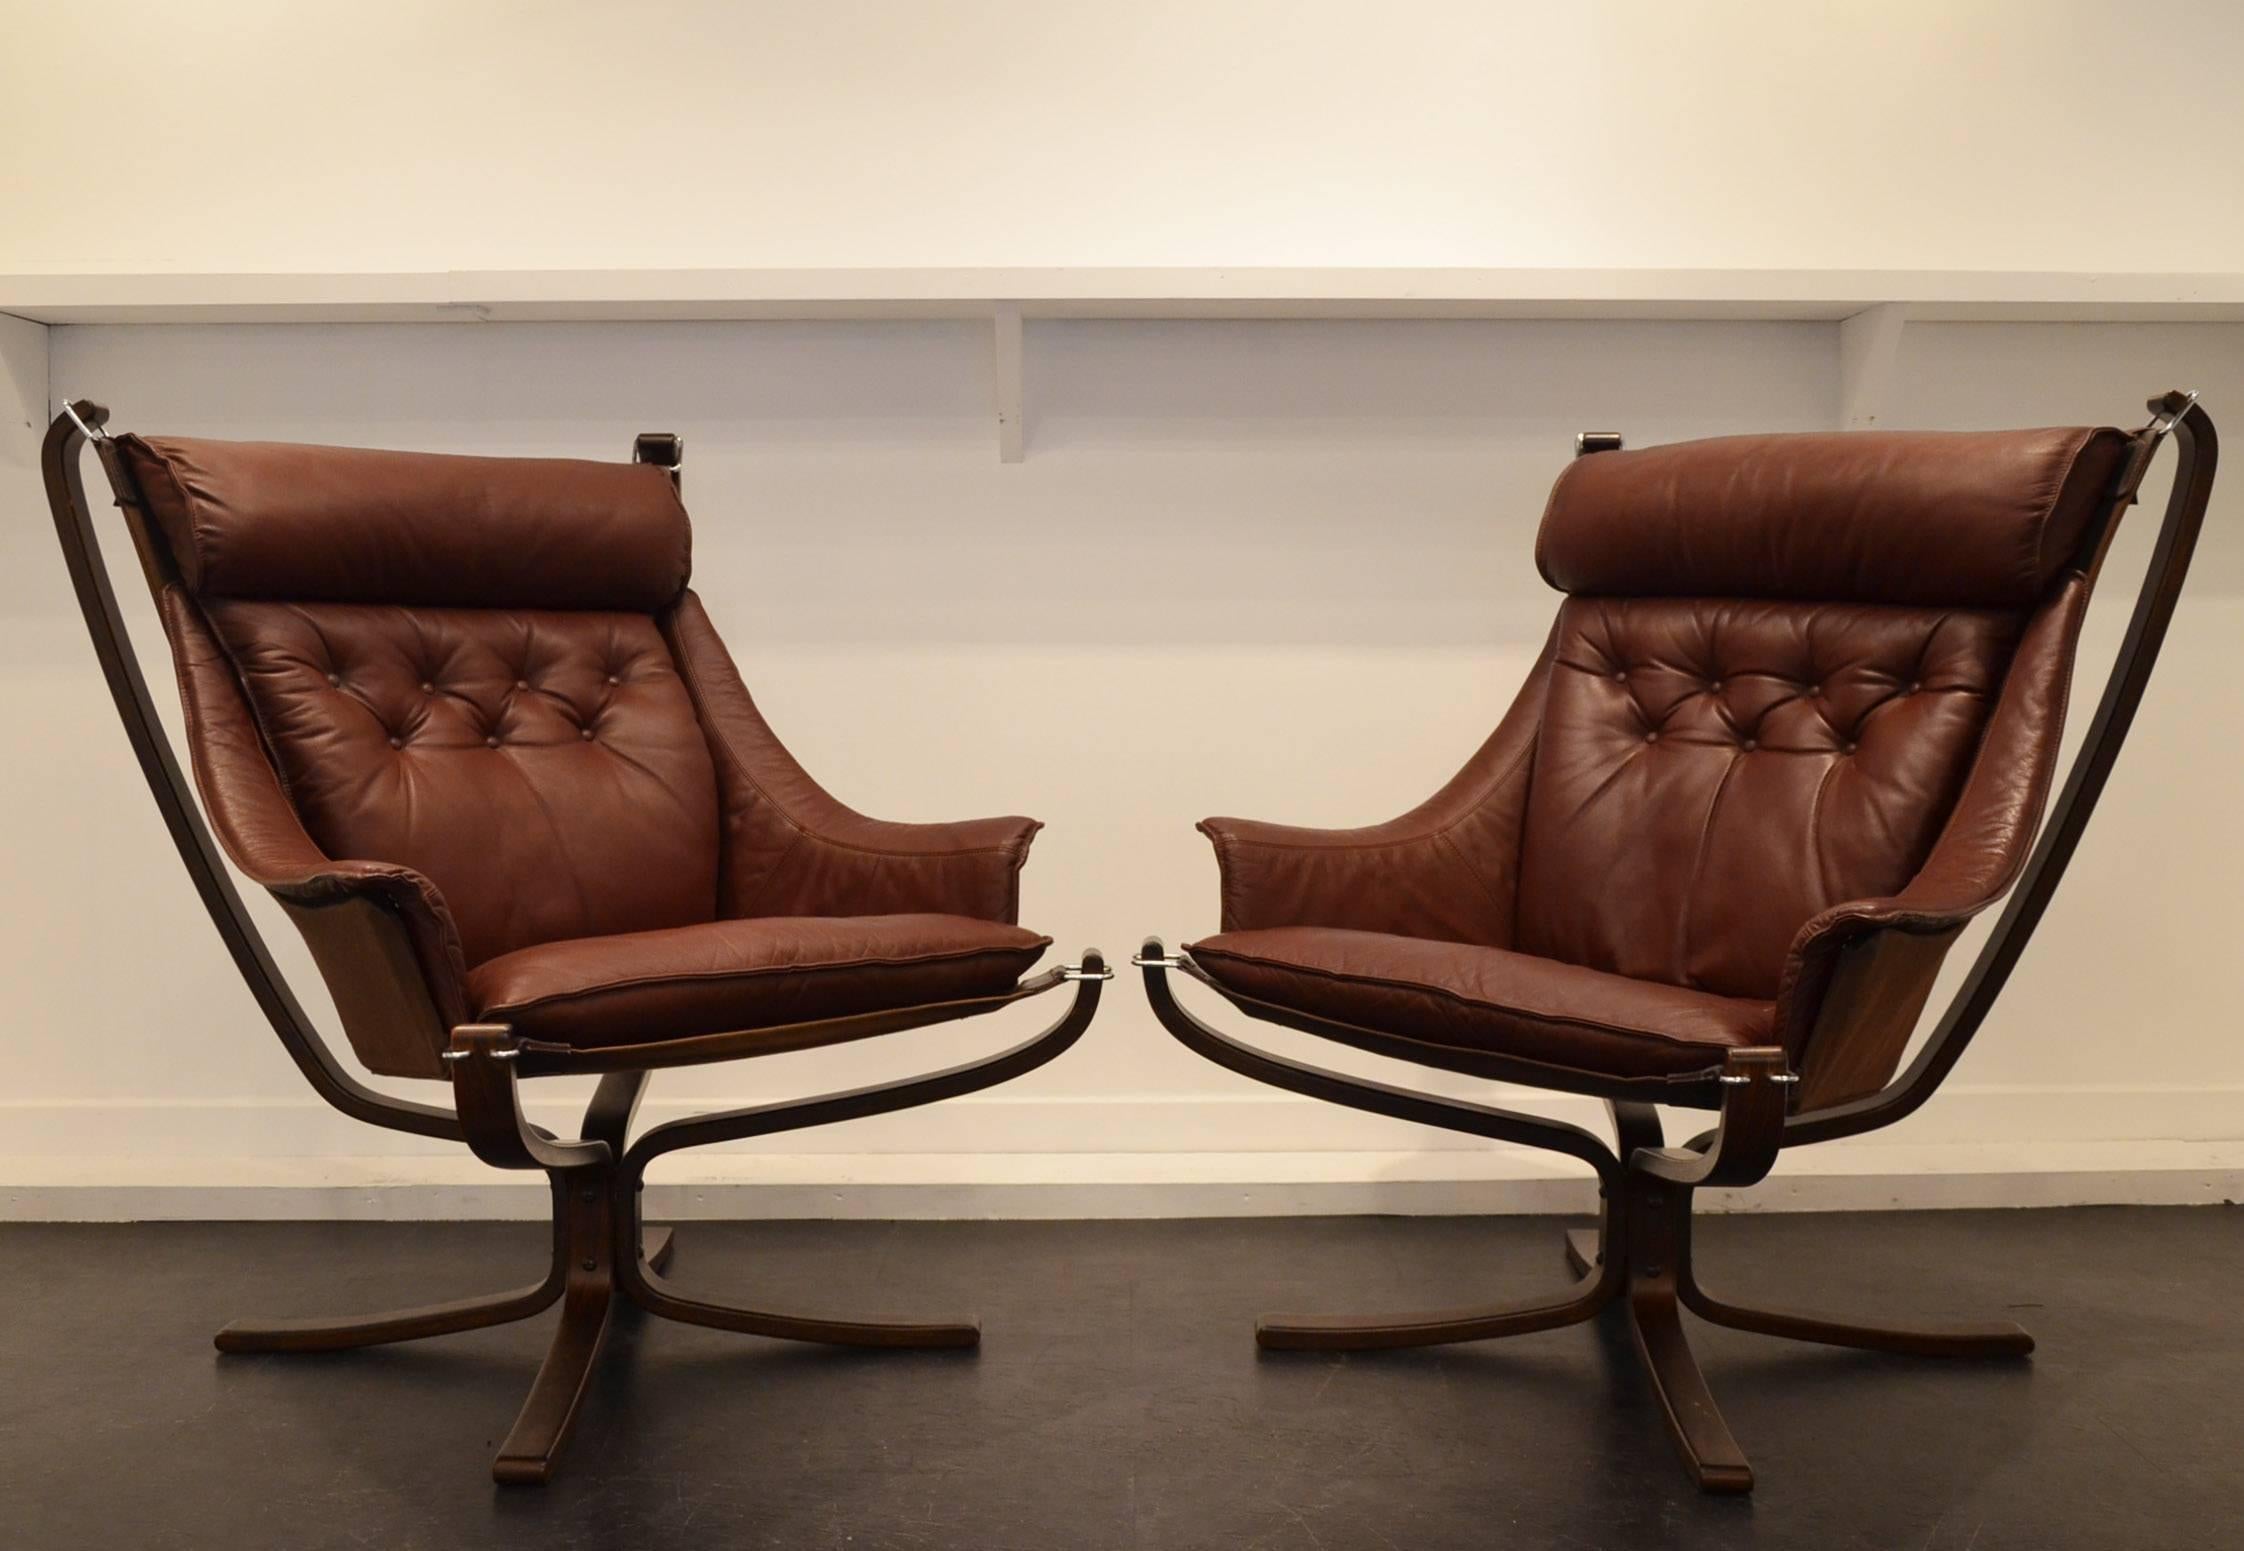 Designed by Sigurd Ressel and produced by Vatne Mobler,
chocolate brown buffalo leather.